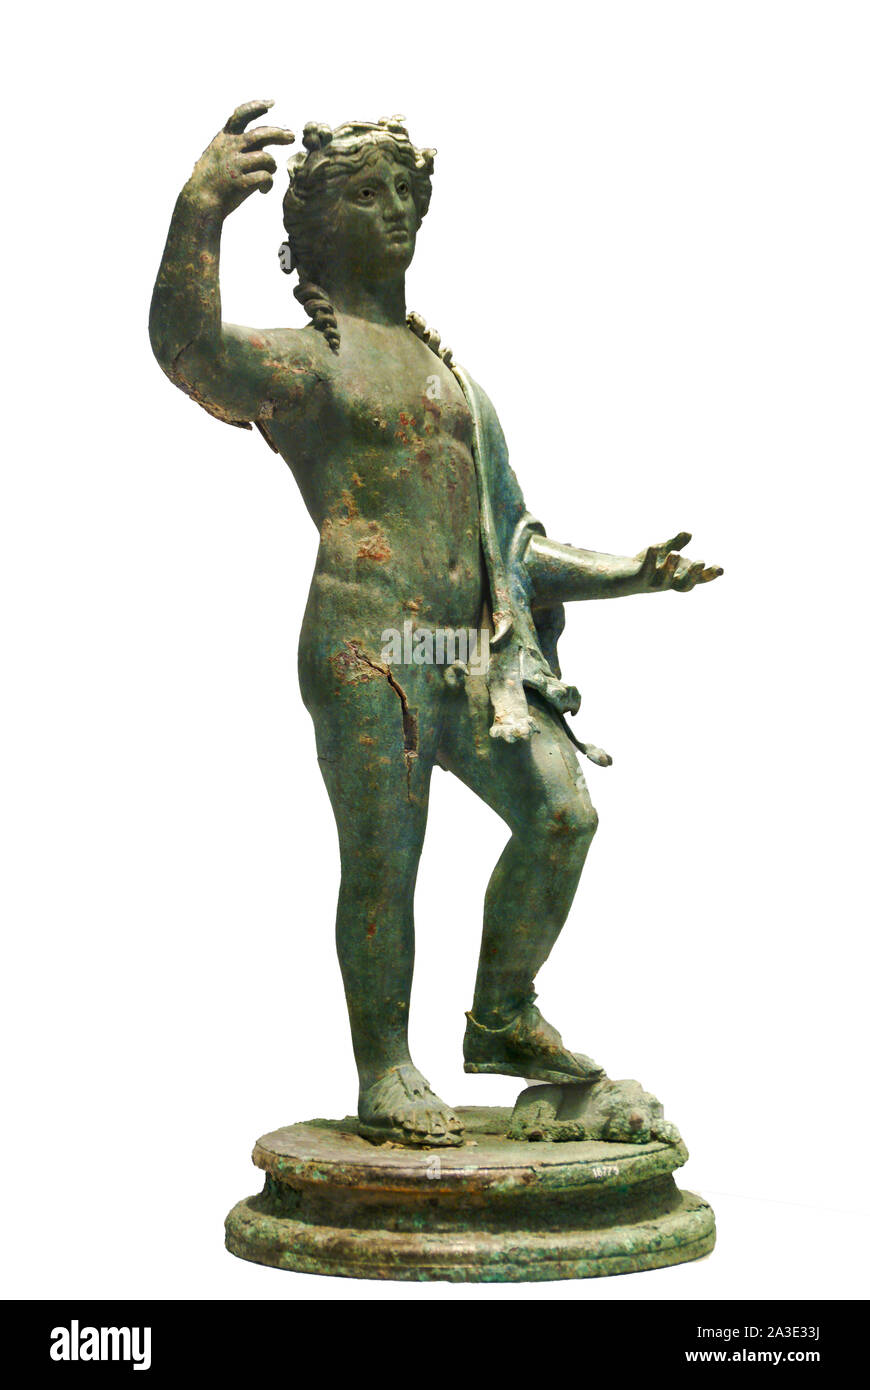 National Archaeological Museum; Athens, Greece.Bronze, metalwork, statue Stock Photo